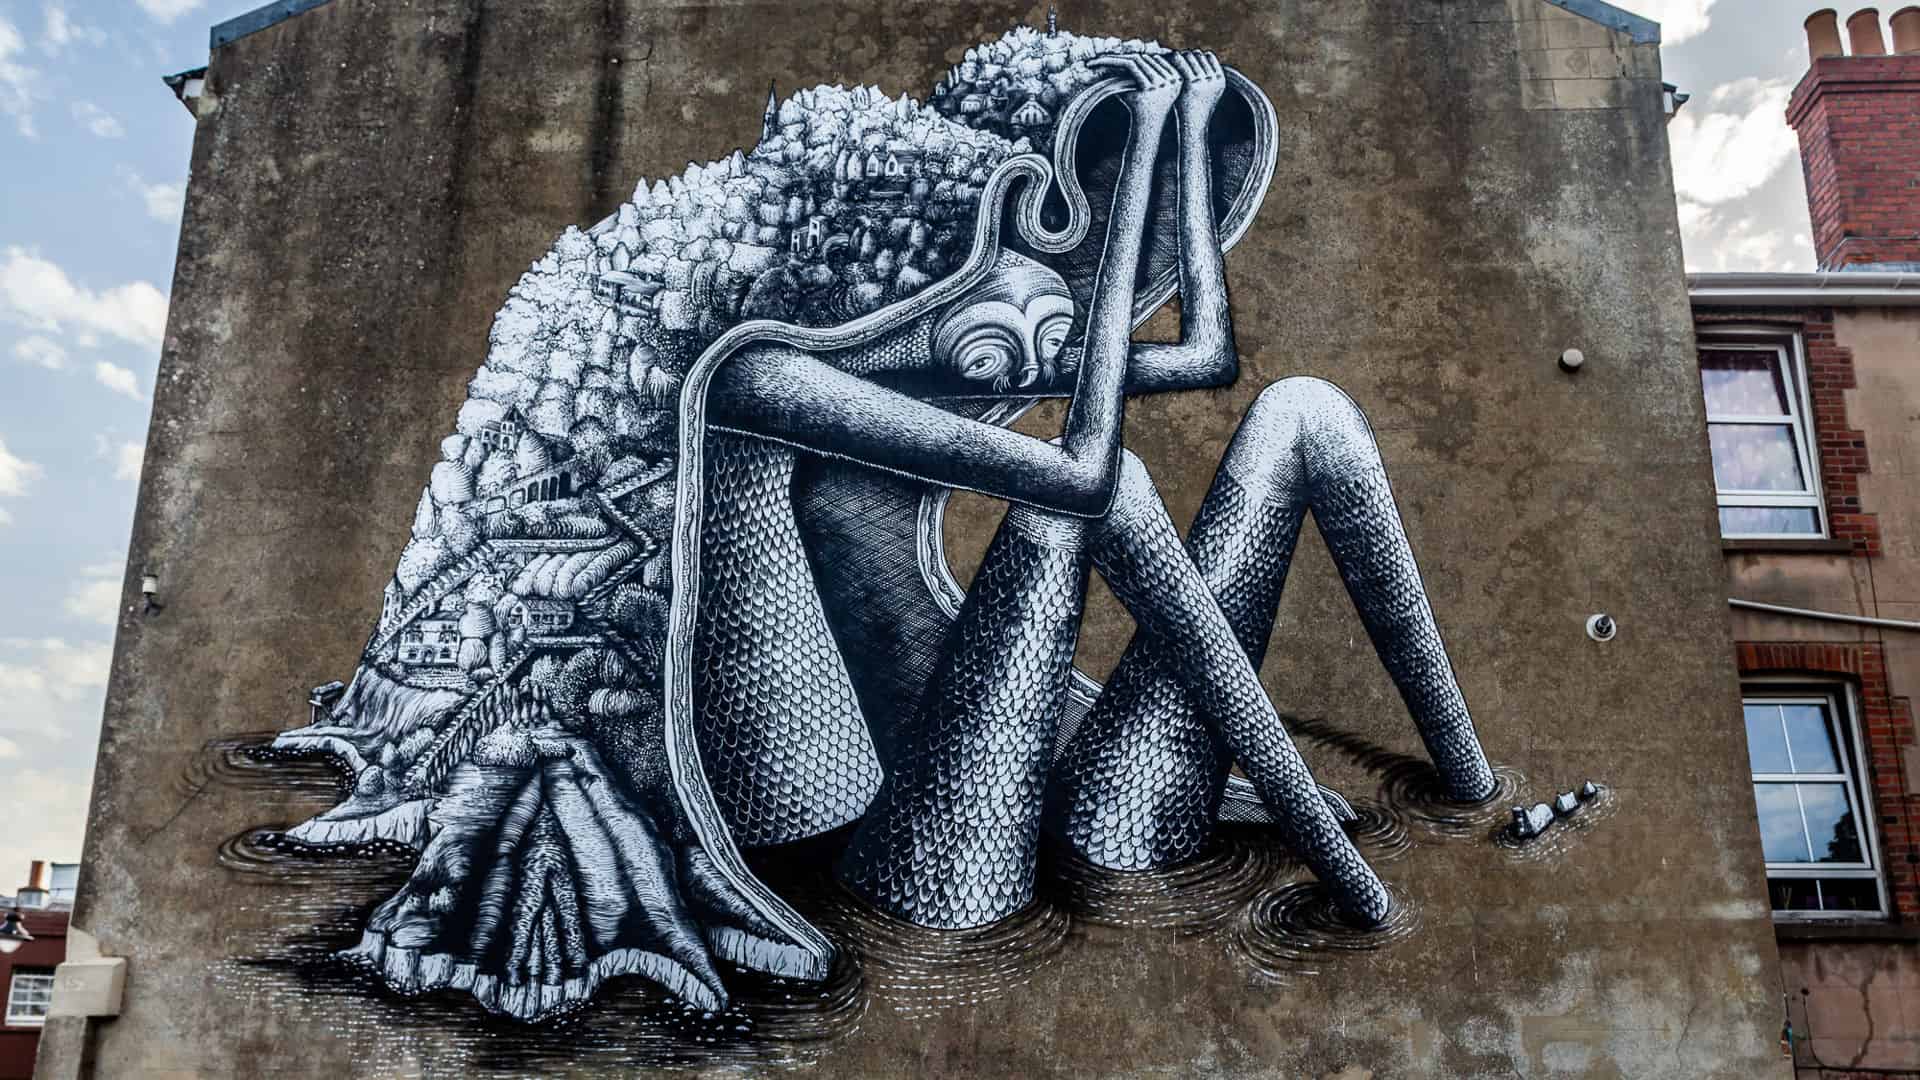 The Ventnor Giant Mural on side of a building by Phlegm